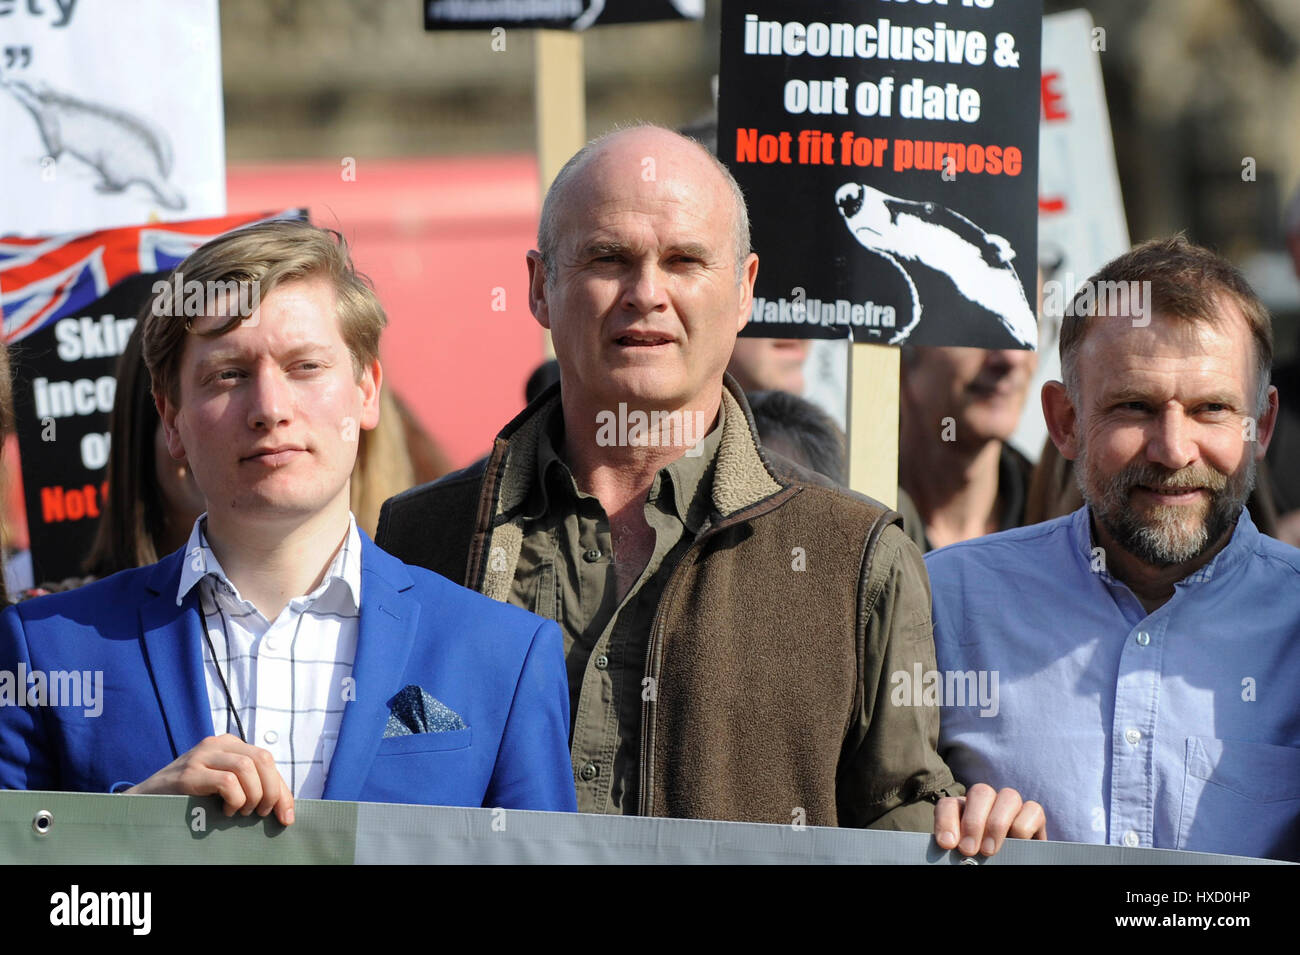 London, UK. 27th Mar, 2017. (C) BBC wildlife presenter Simon King joins animal activists taking part in a Save the Badger rally outside Parliament. Mr King will be giving a presentation to MPs who are due to debate the culling of badgers in the House of Commons today. Credit: Stephen Chung/Alamy Live News Stock Photo